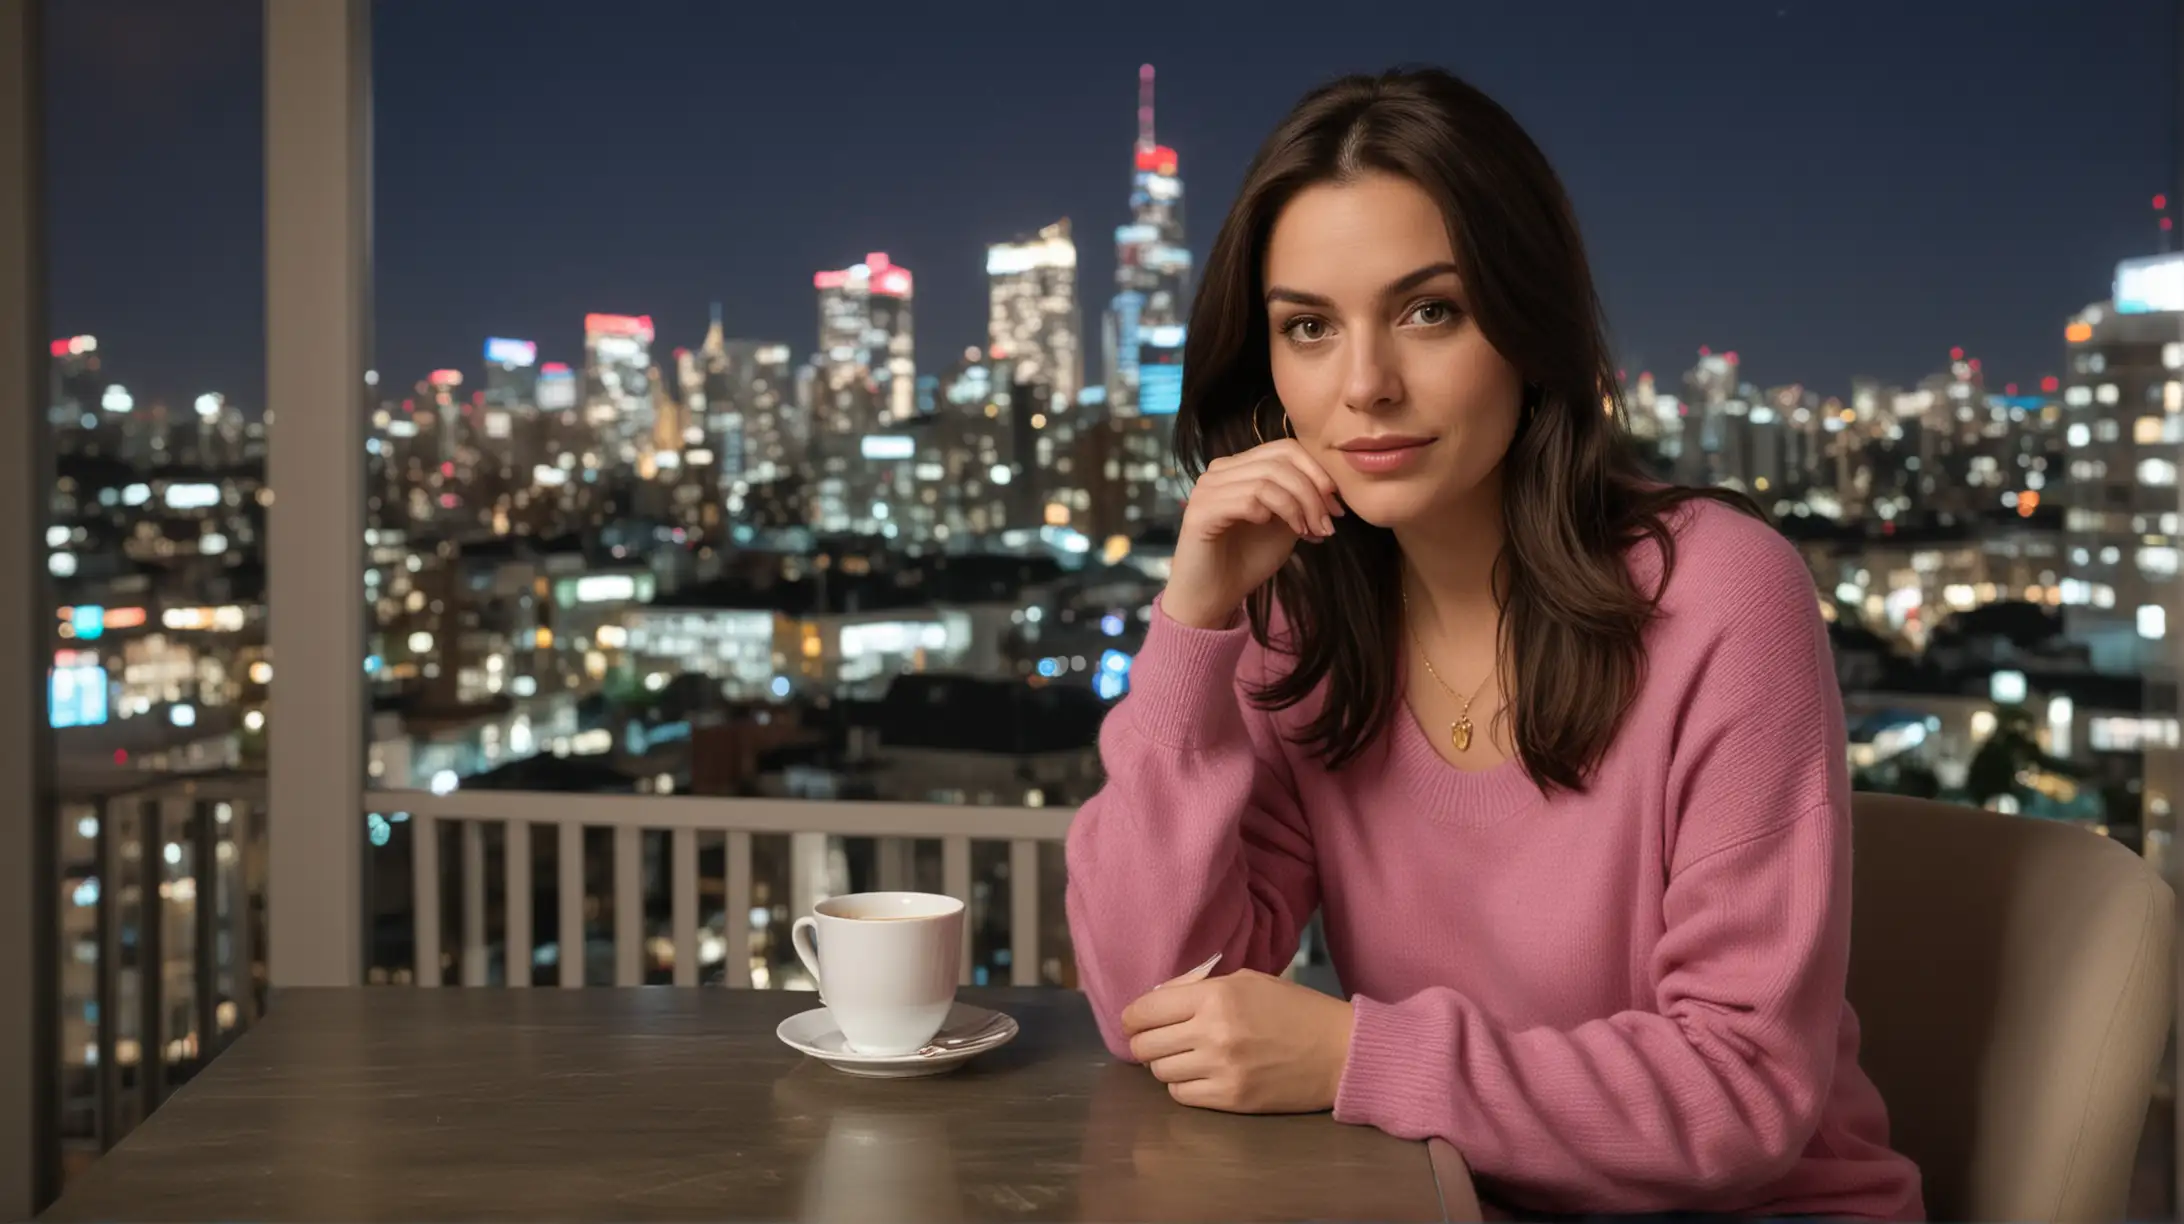 30 year old white woman with long dark brown hair parted to the right, wearing a gold necklace, pink sweater and blue jeans. She is sitting down at a table with a cup of tea, modern high rise apartment background at night